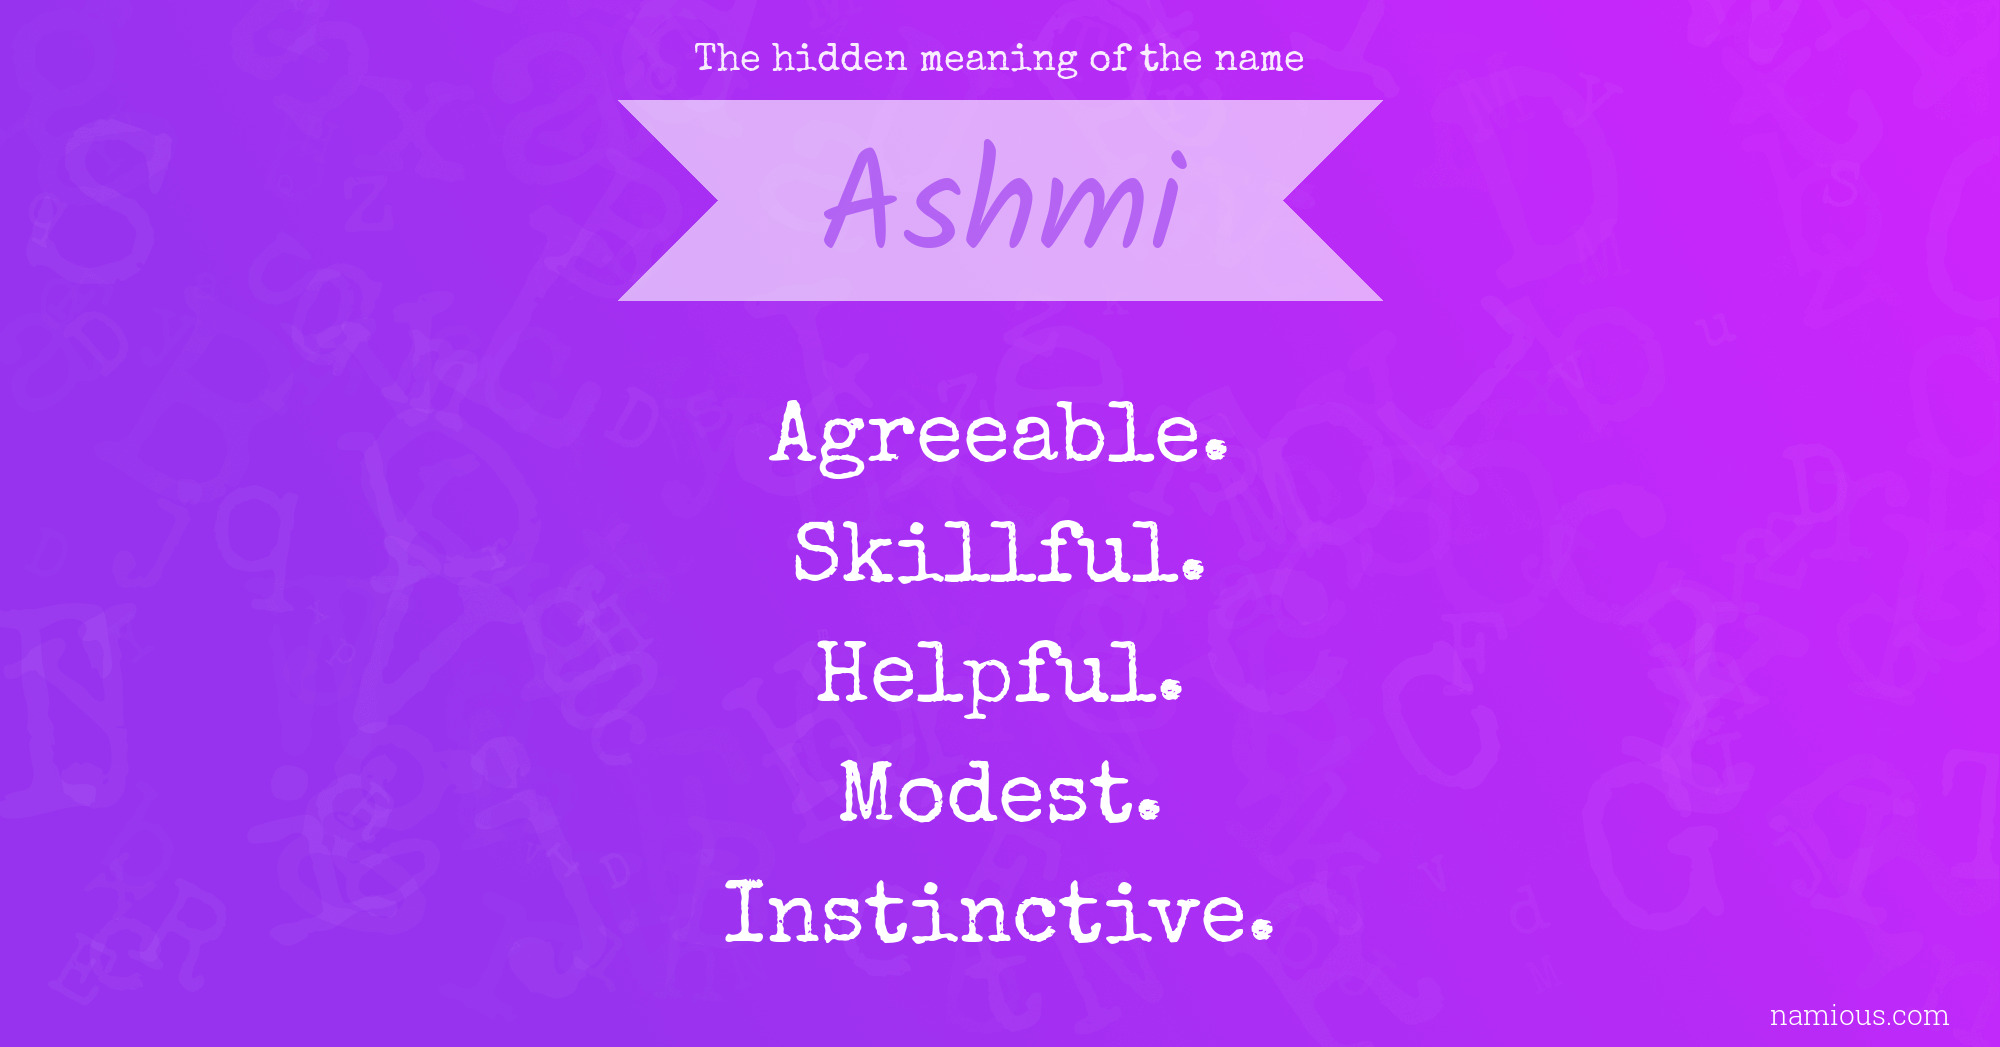 The hidden meaning of the name Ashmi